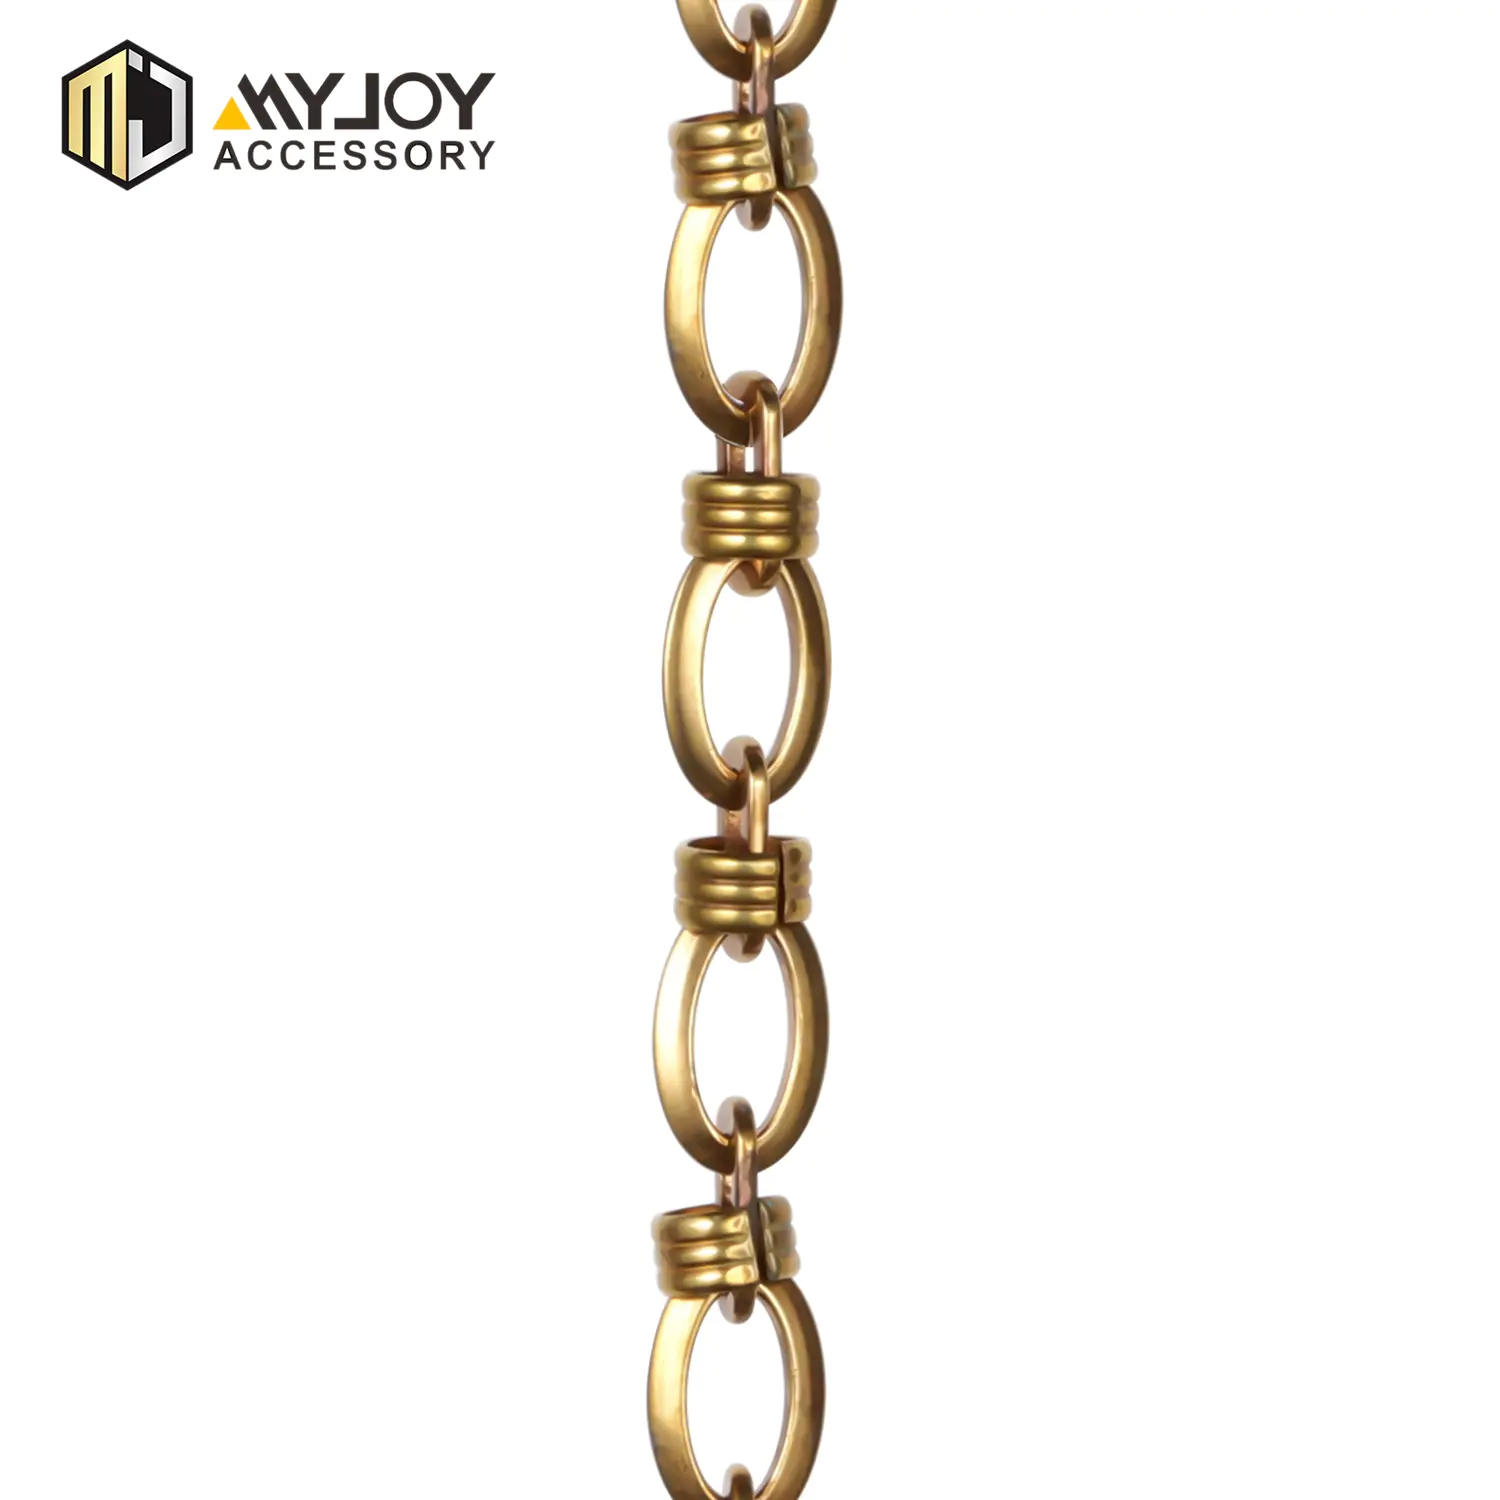 stable bag chain chain suppliers for bags